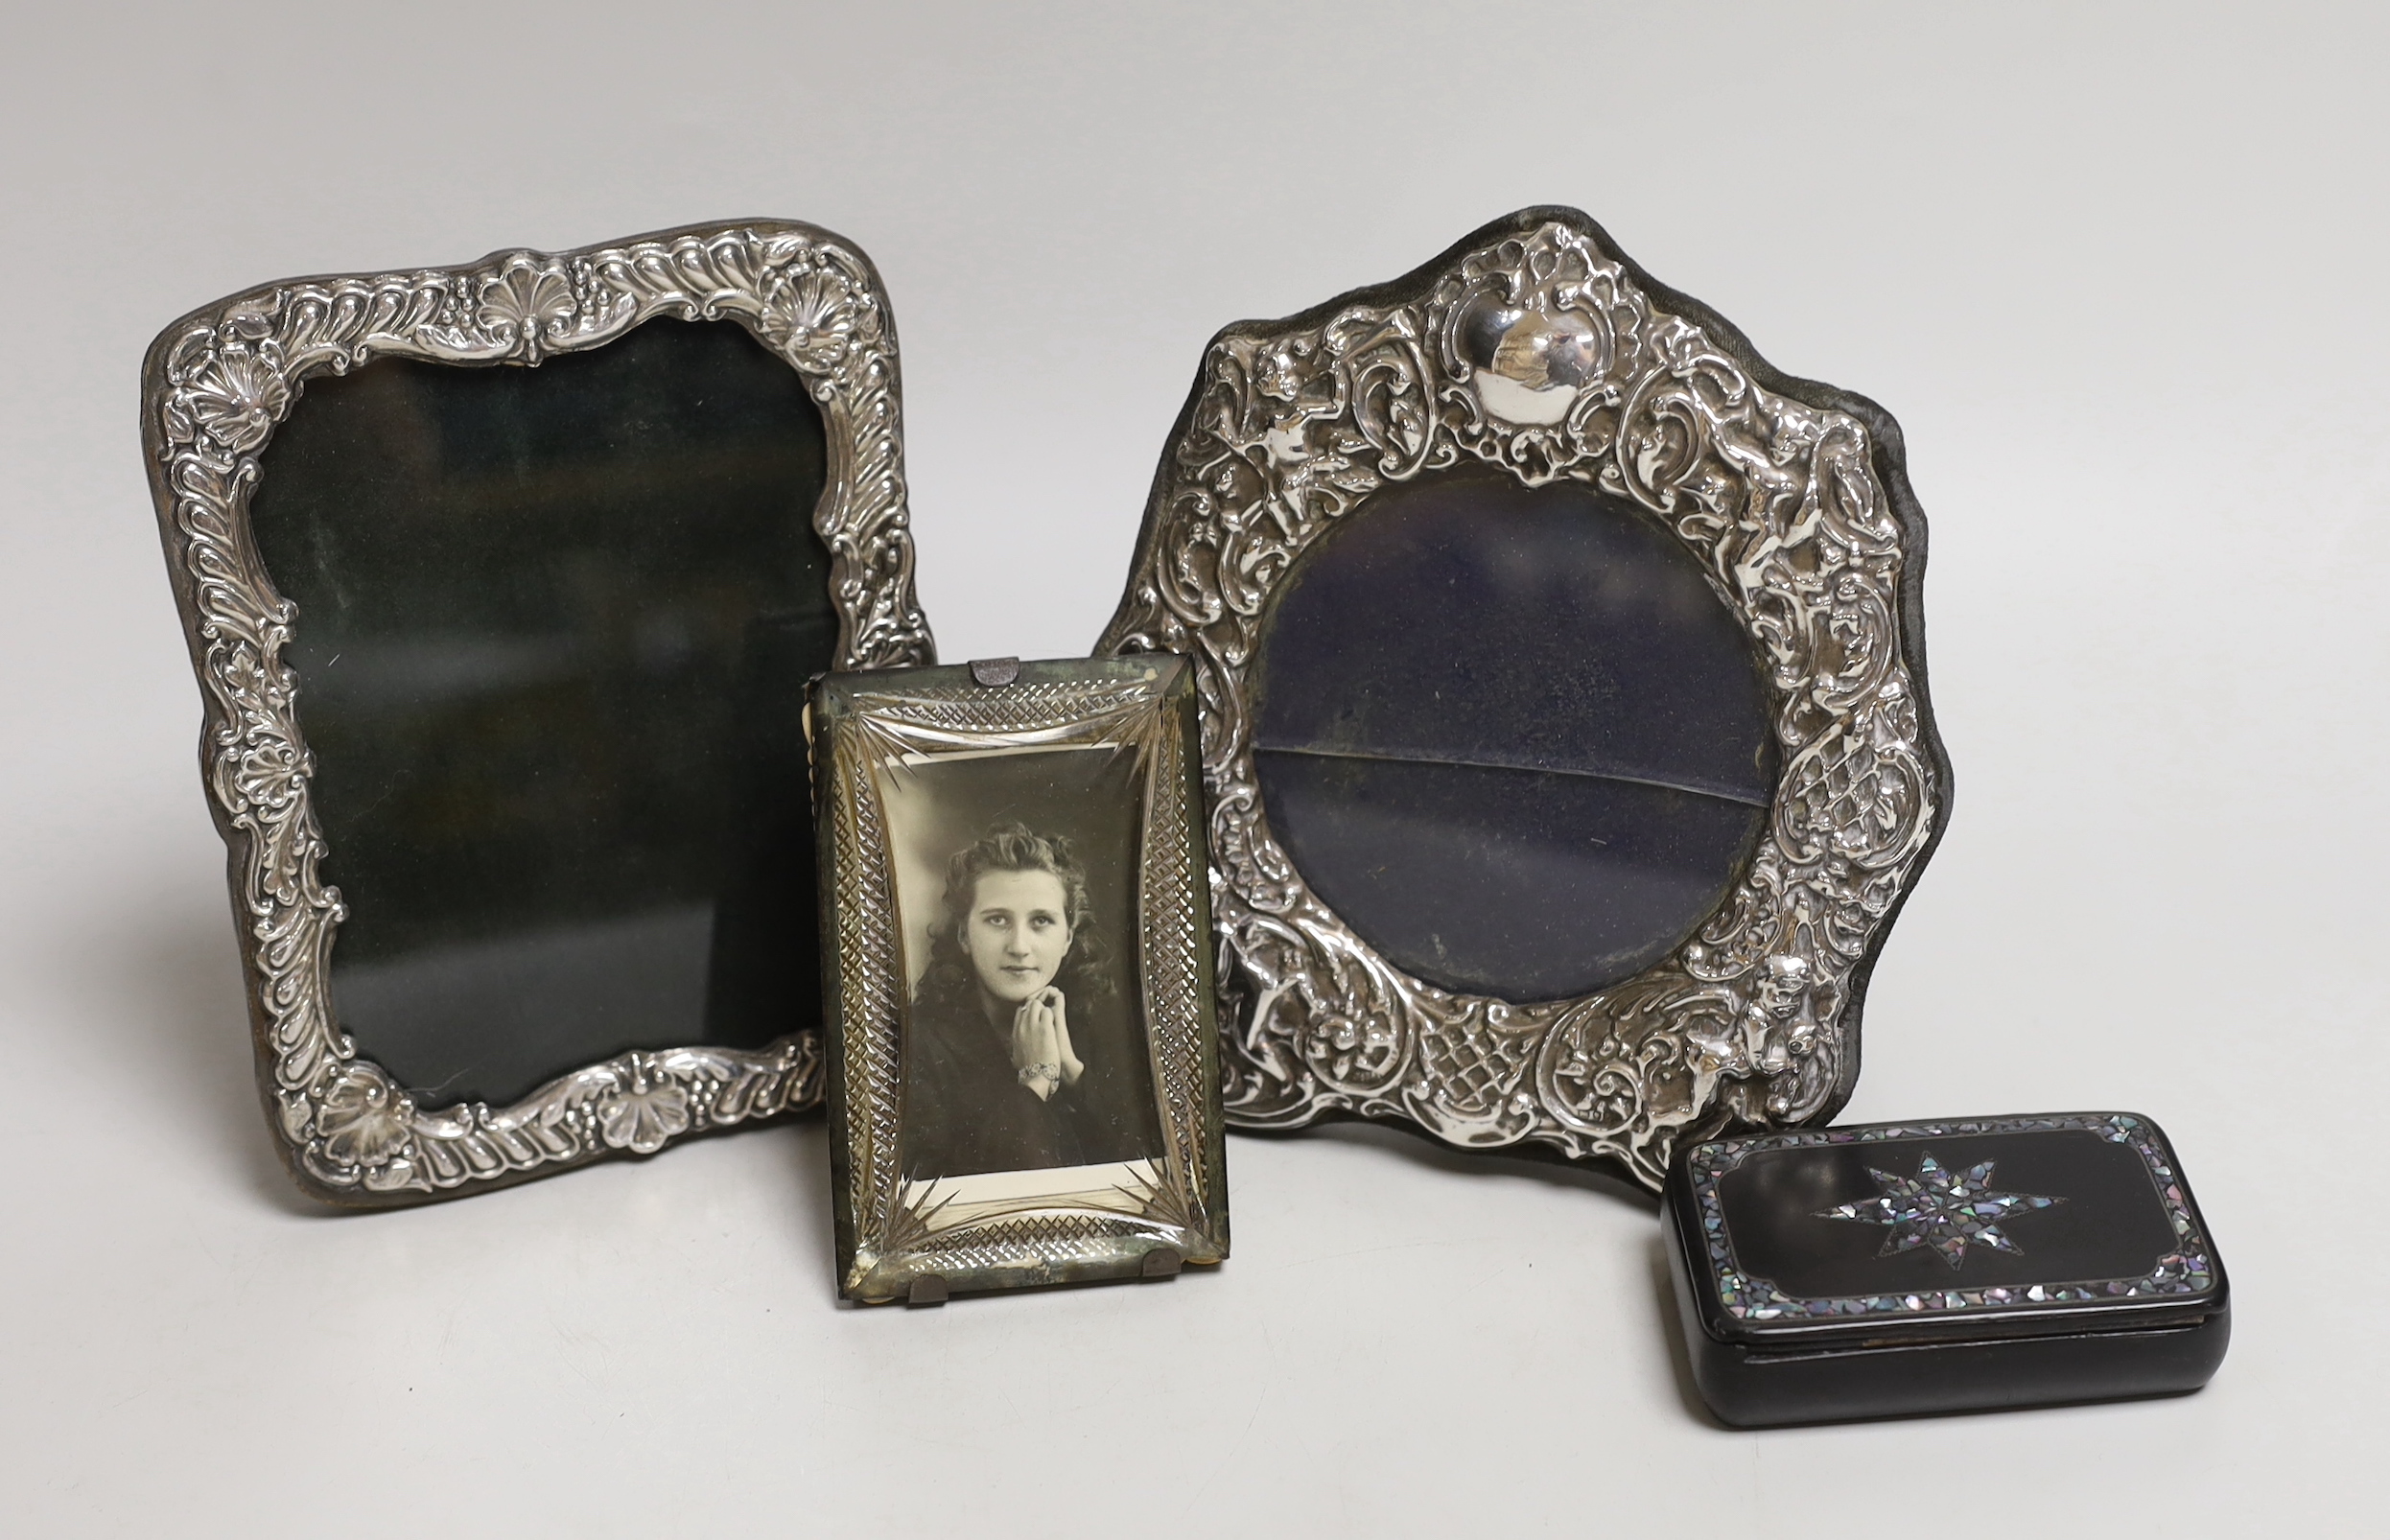 Two silver frames, a glass frame and a papier mache and mother of pearl snuff box